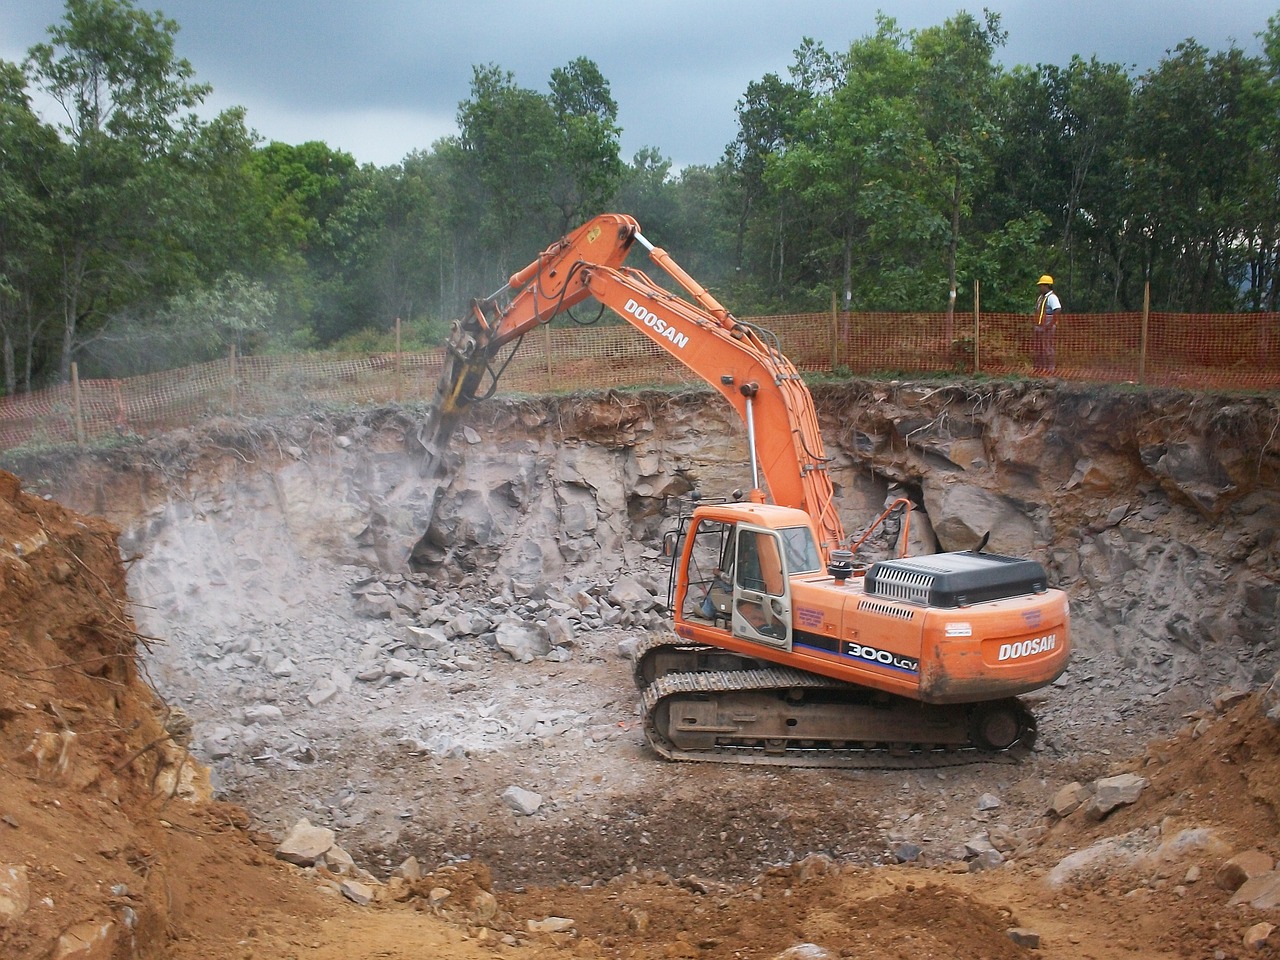 Digging a hole,construction,foundation,engineering,workers - free image from needpix.com